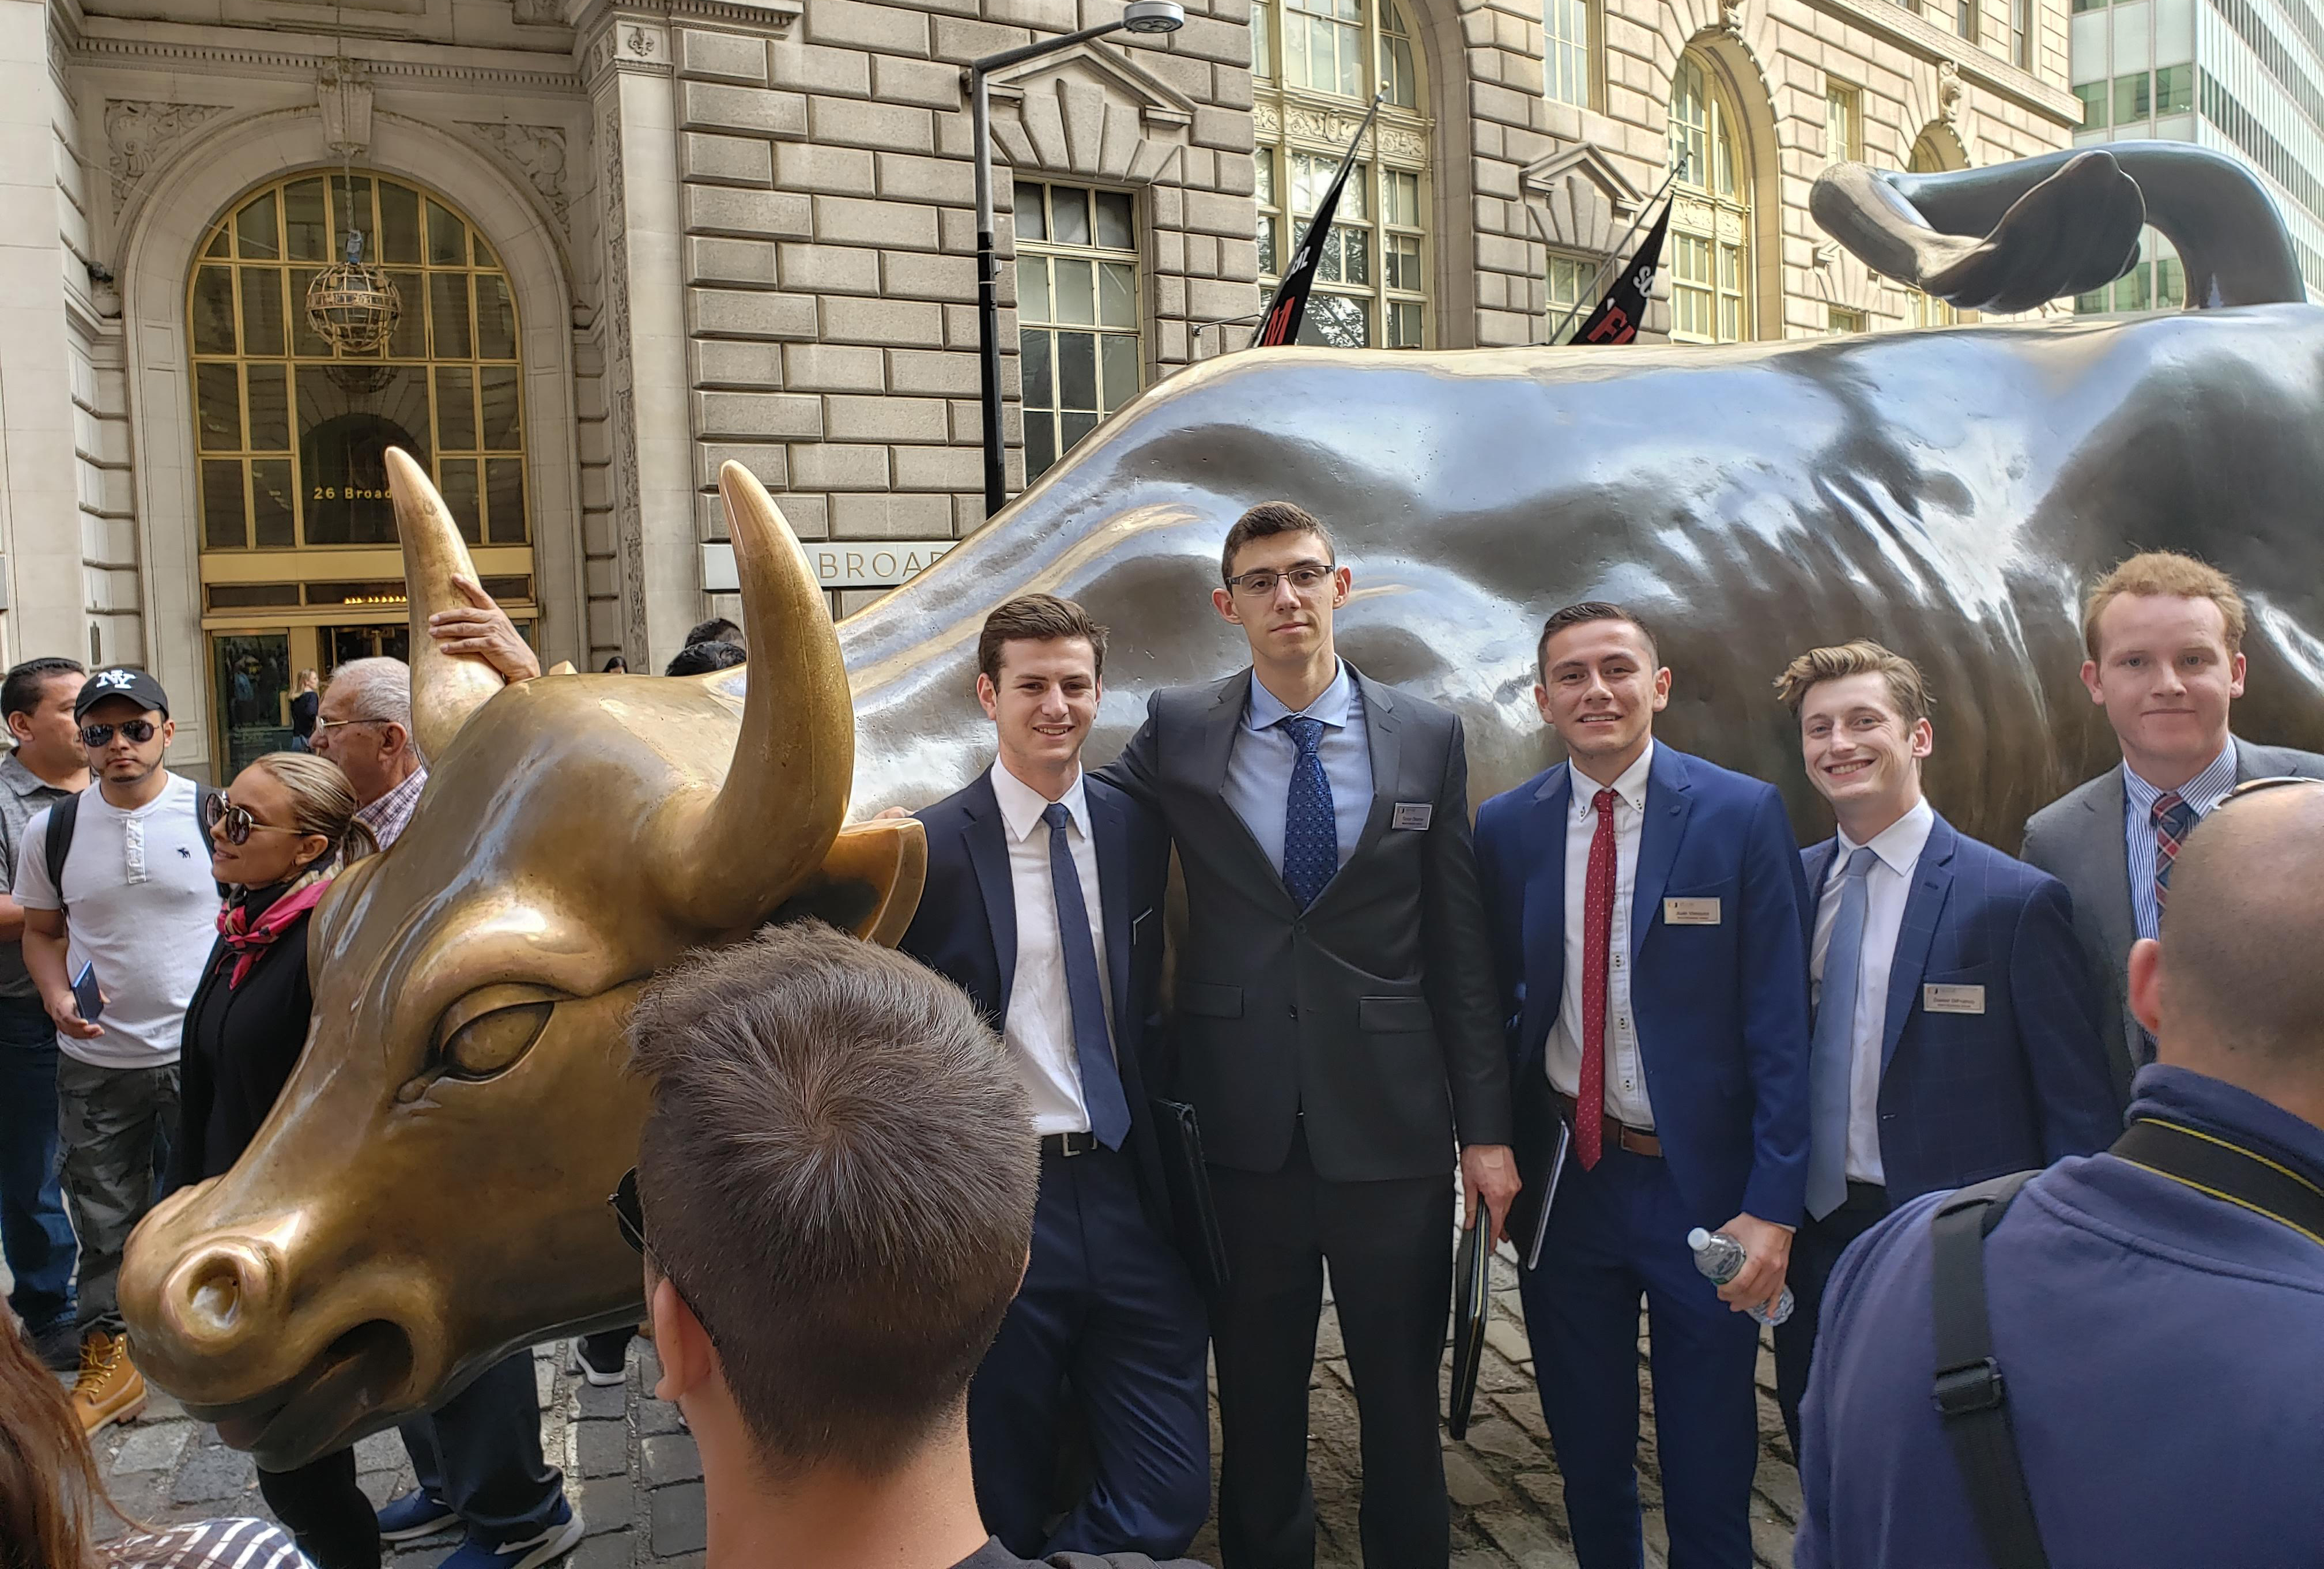 Students in formal attire pose on Wall Street.